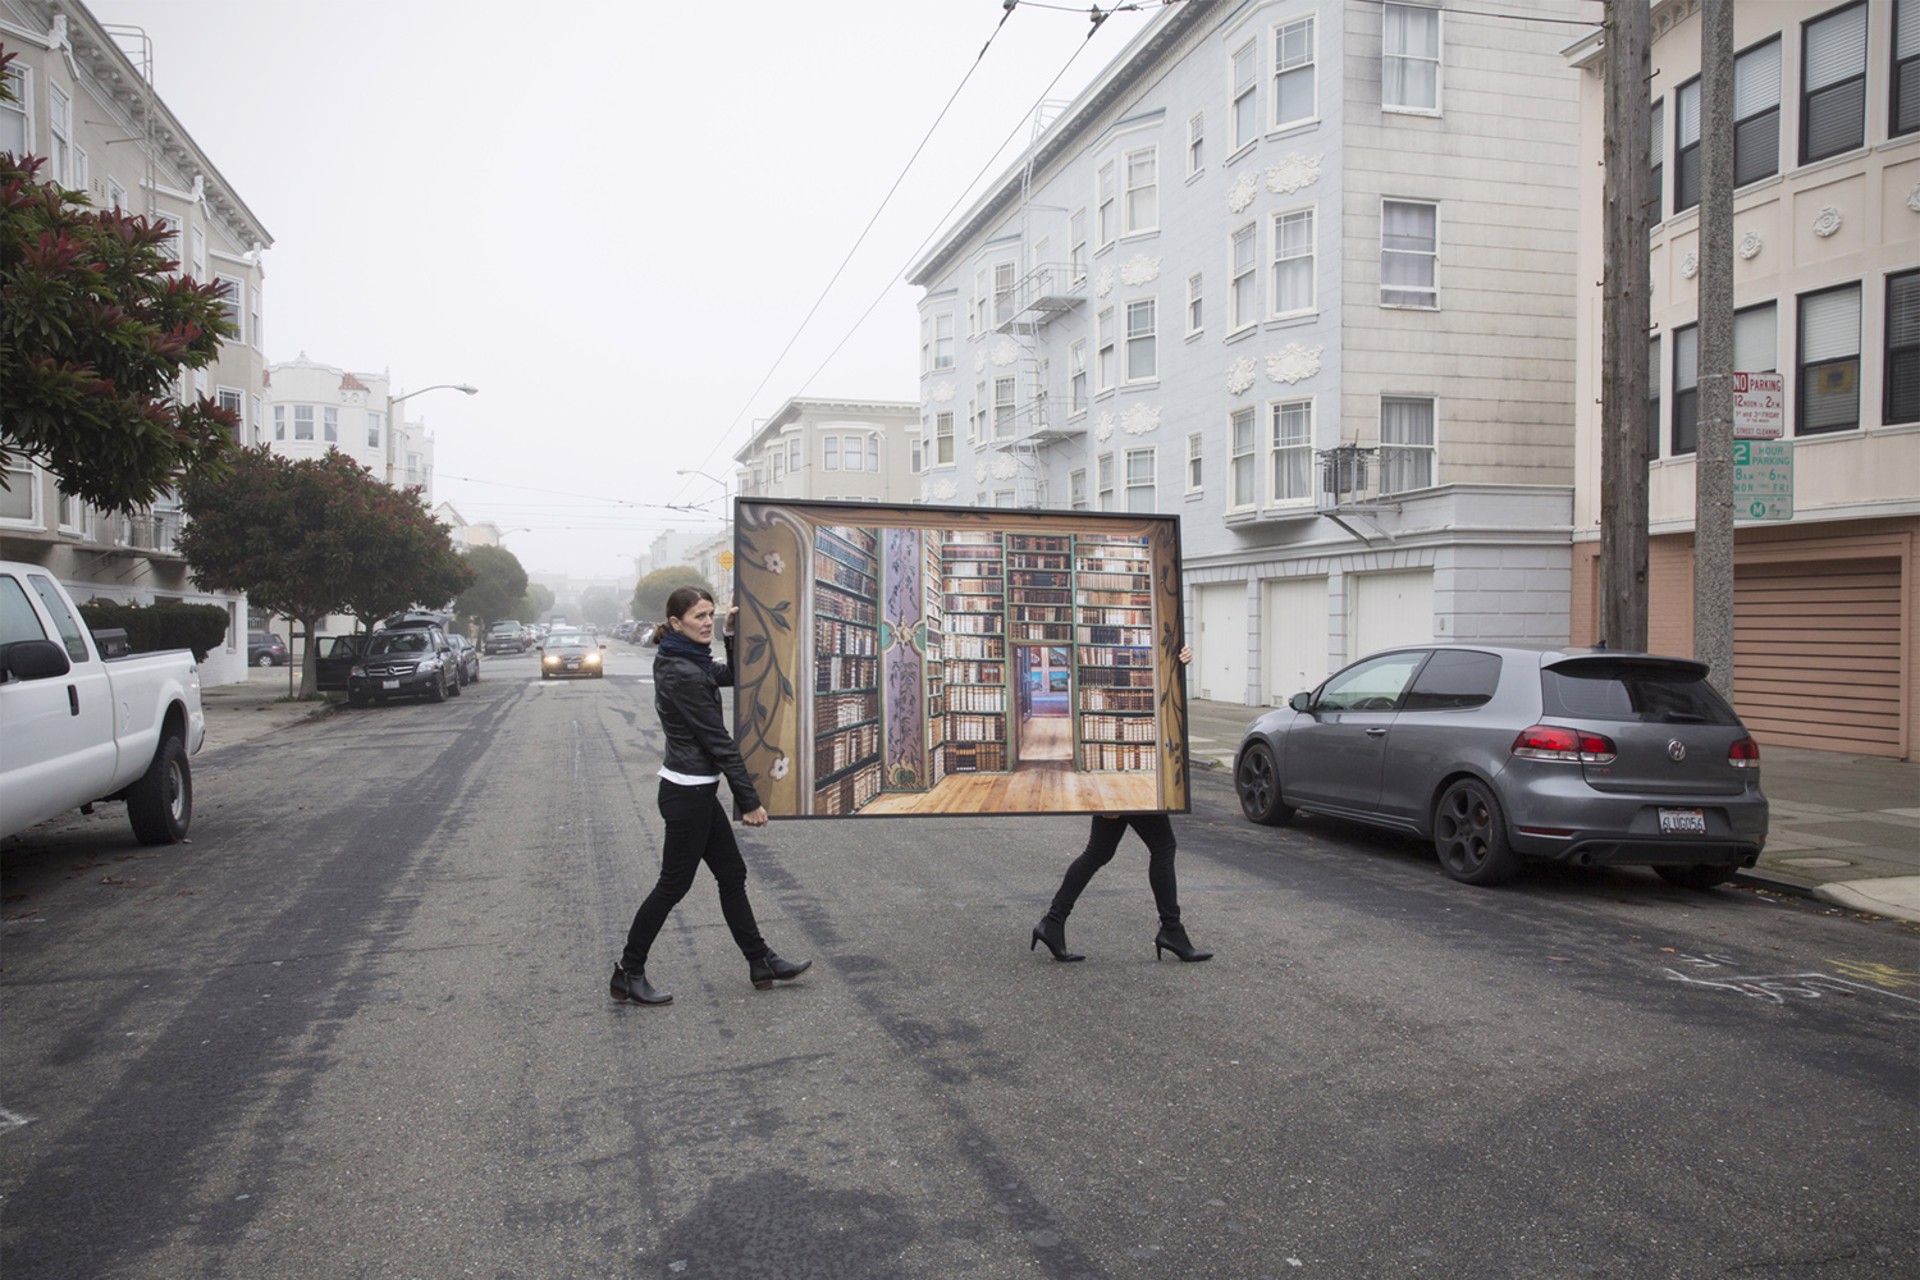 Francisco St, SF (1/5) by Andy Freeberg